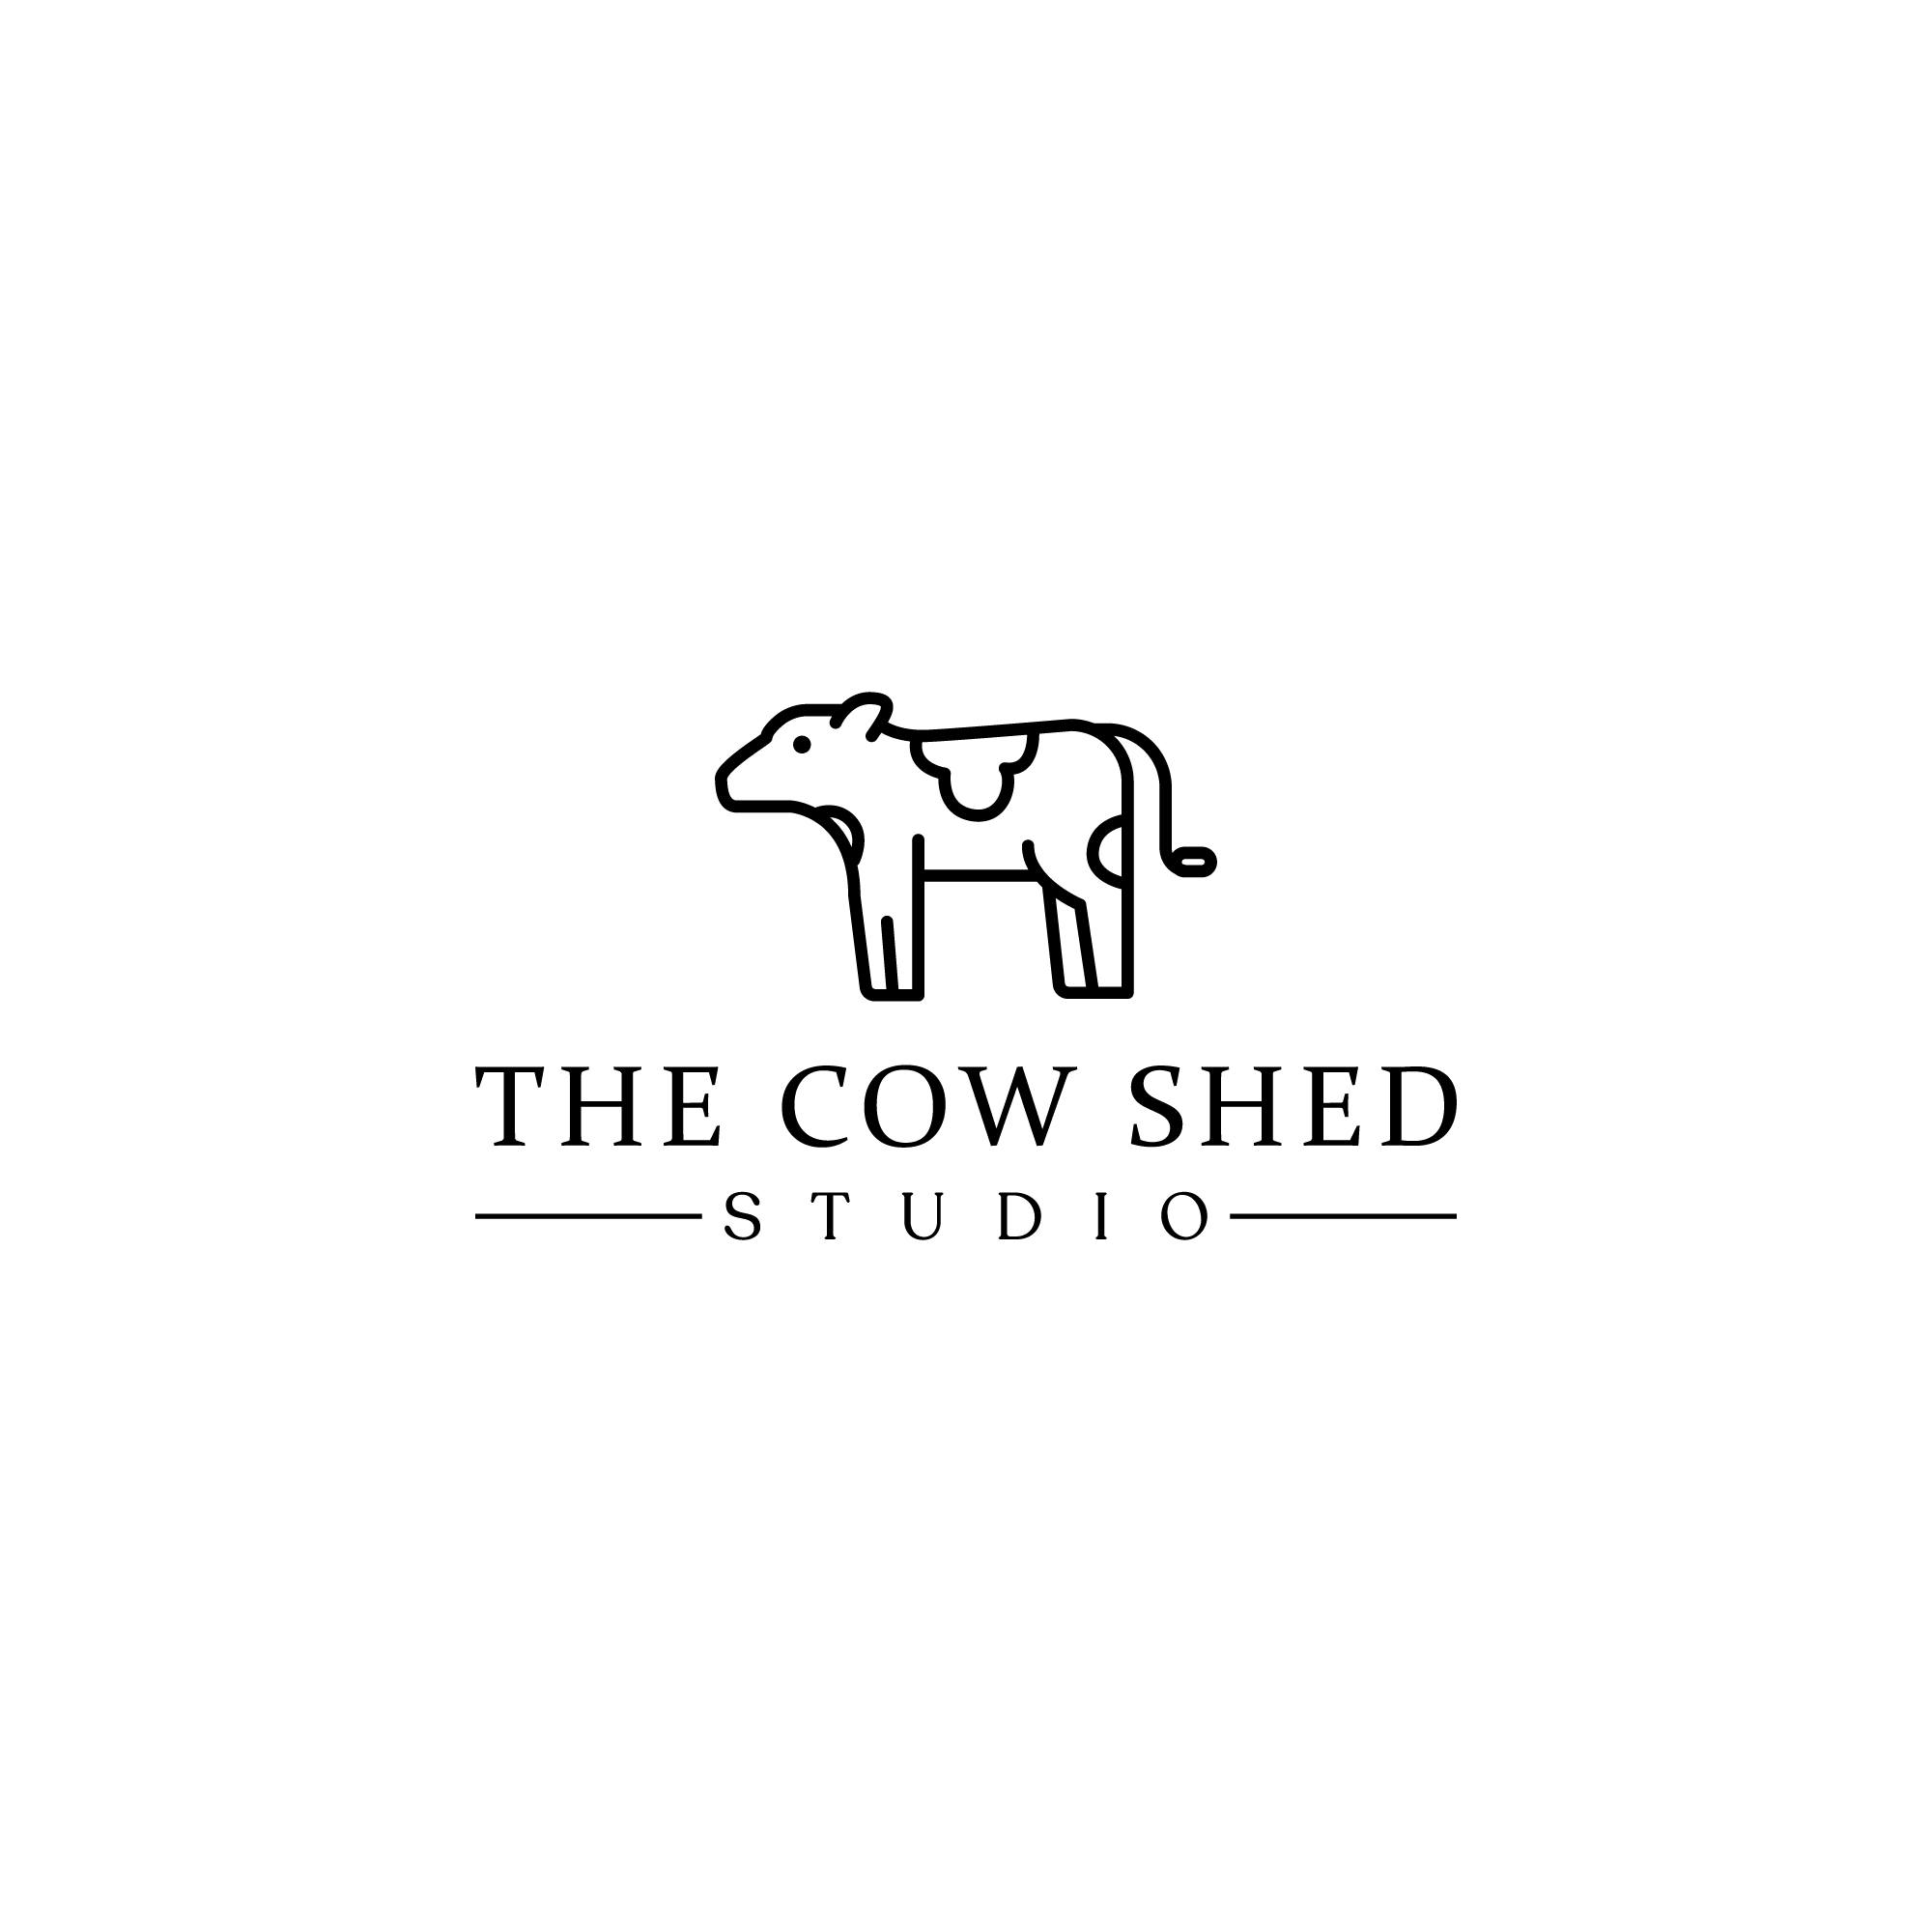 EXHIBITOR: The Cow Shed Studio